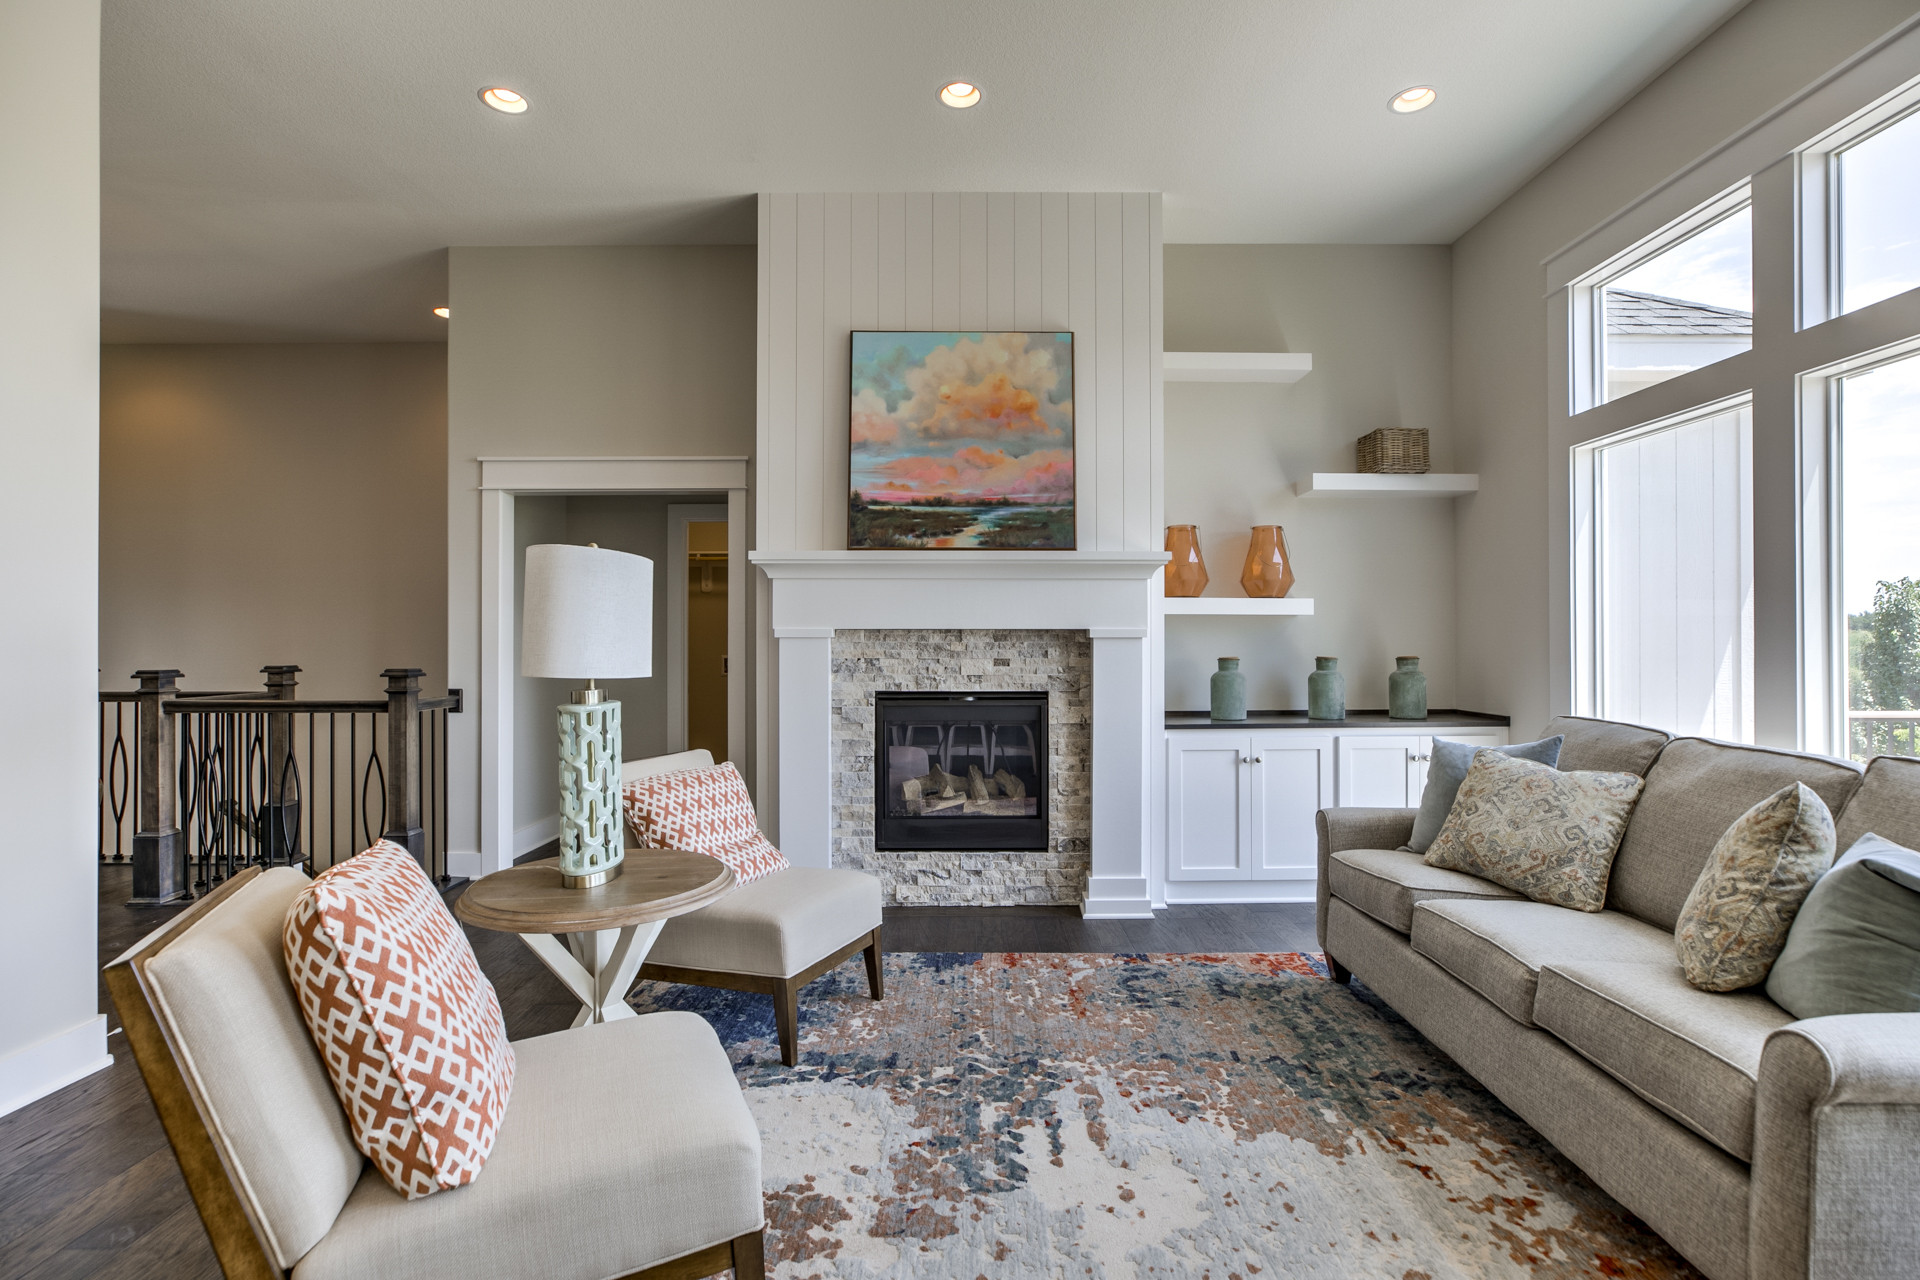 75 Beautiful Farmhouse Living Room Pictures Ideas March 2021 Houzz